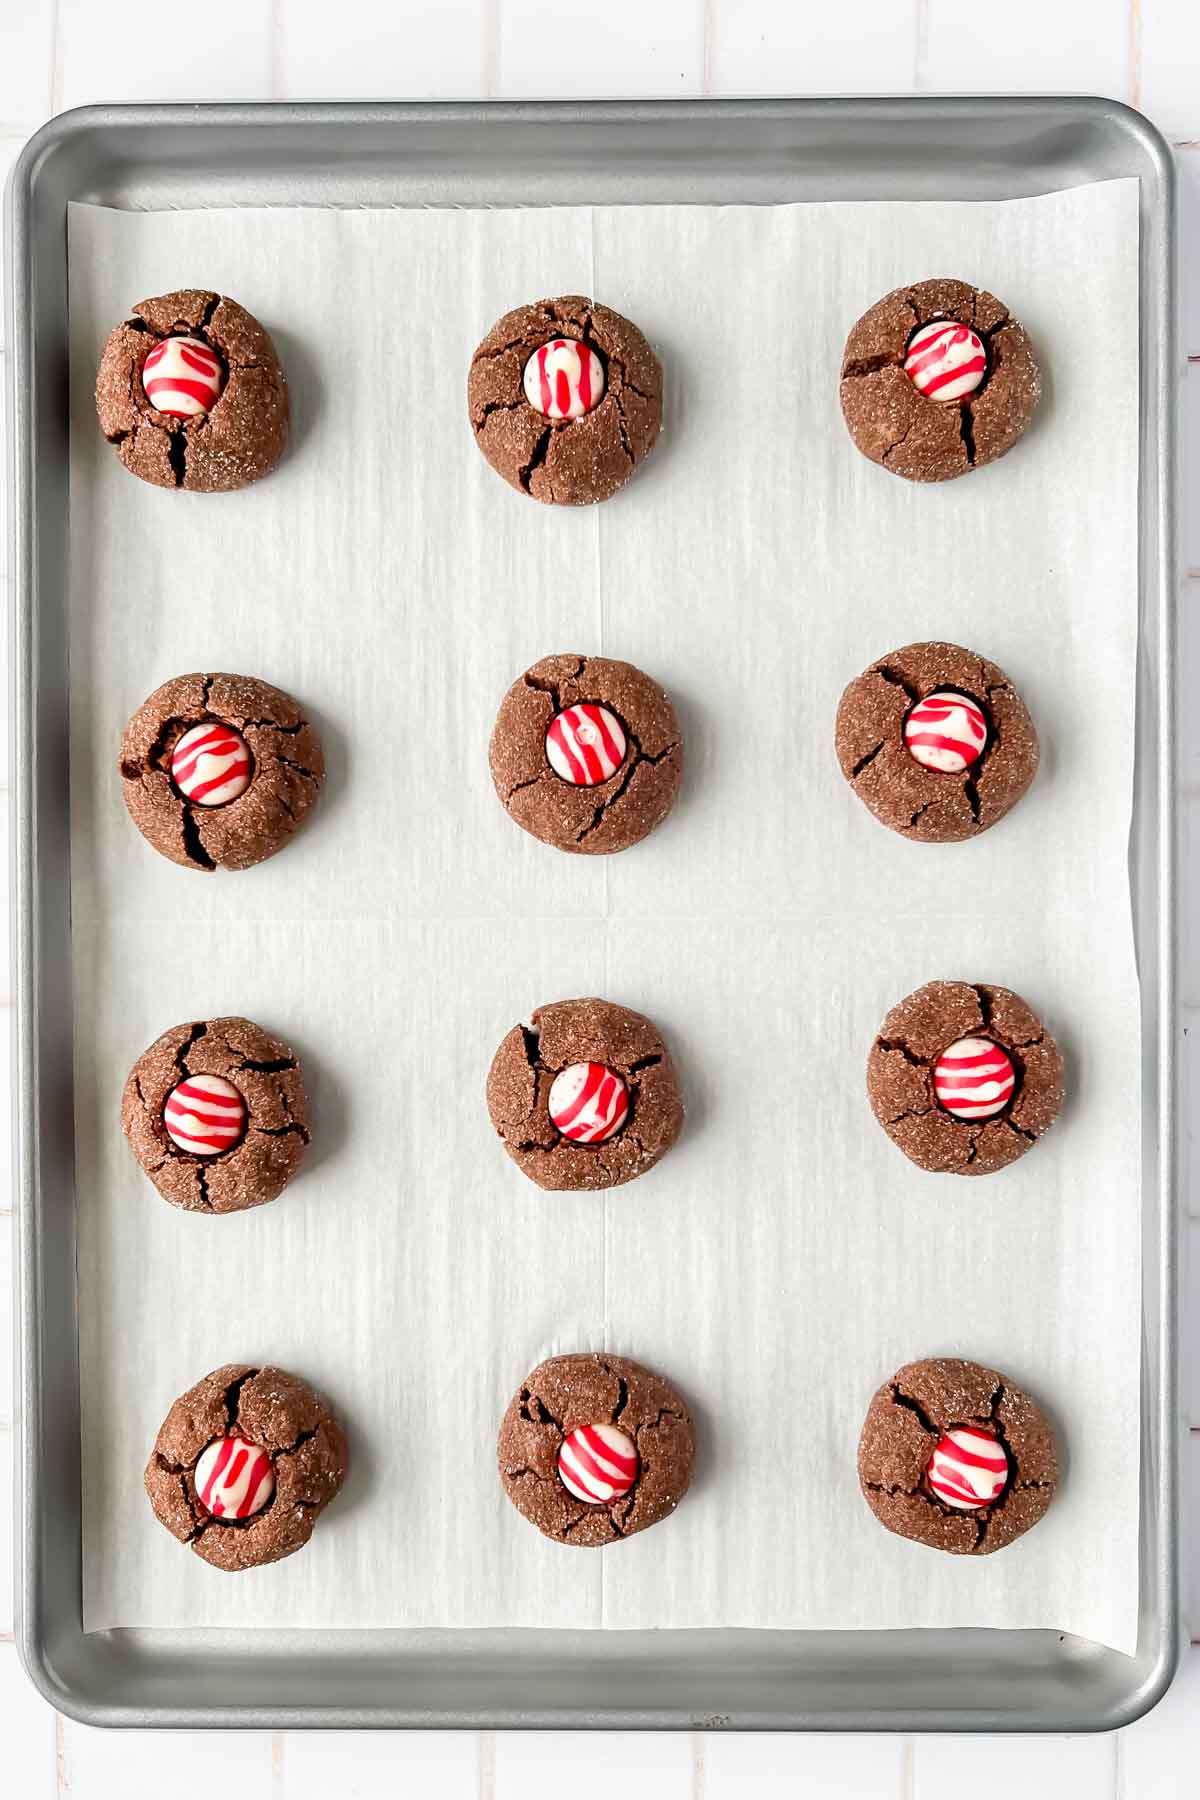 12 chocolate peppermint kiss cookies aligned on silver baking tray lined with parchment.